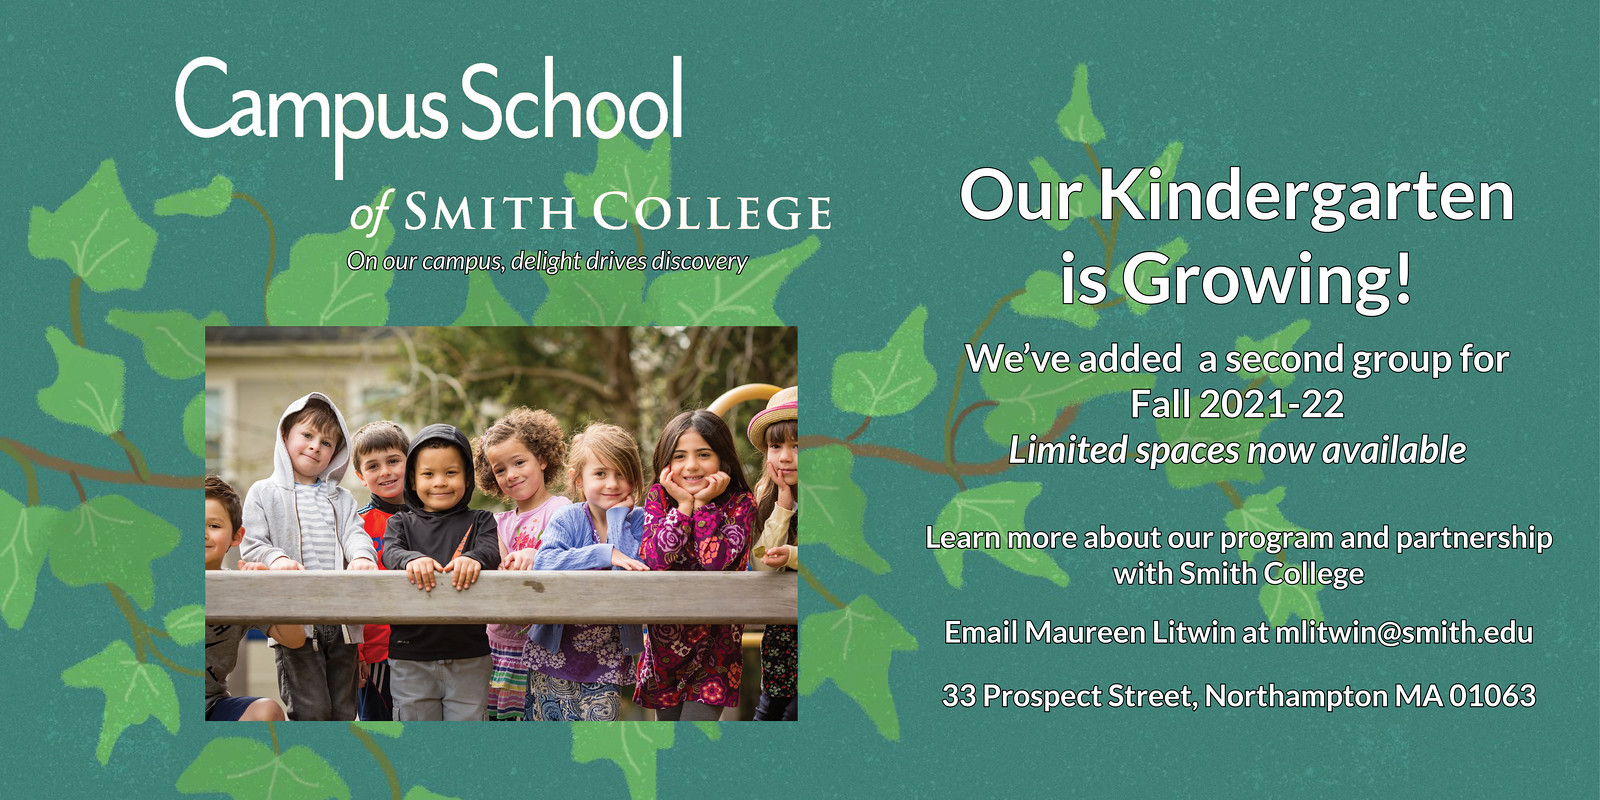 The Campus School in Northampton, MA, is pleased to announce that due to a growth in enrollment, they will be adding a second kindergarten class for the 2021-22 school year.